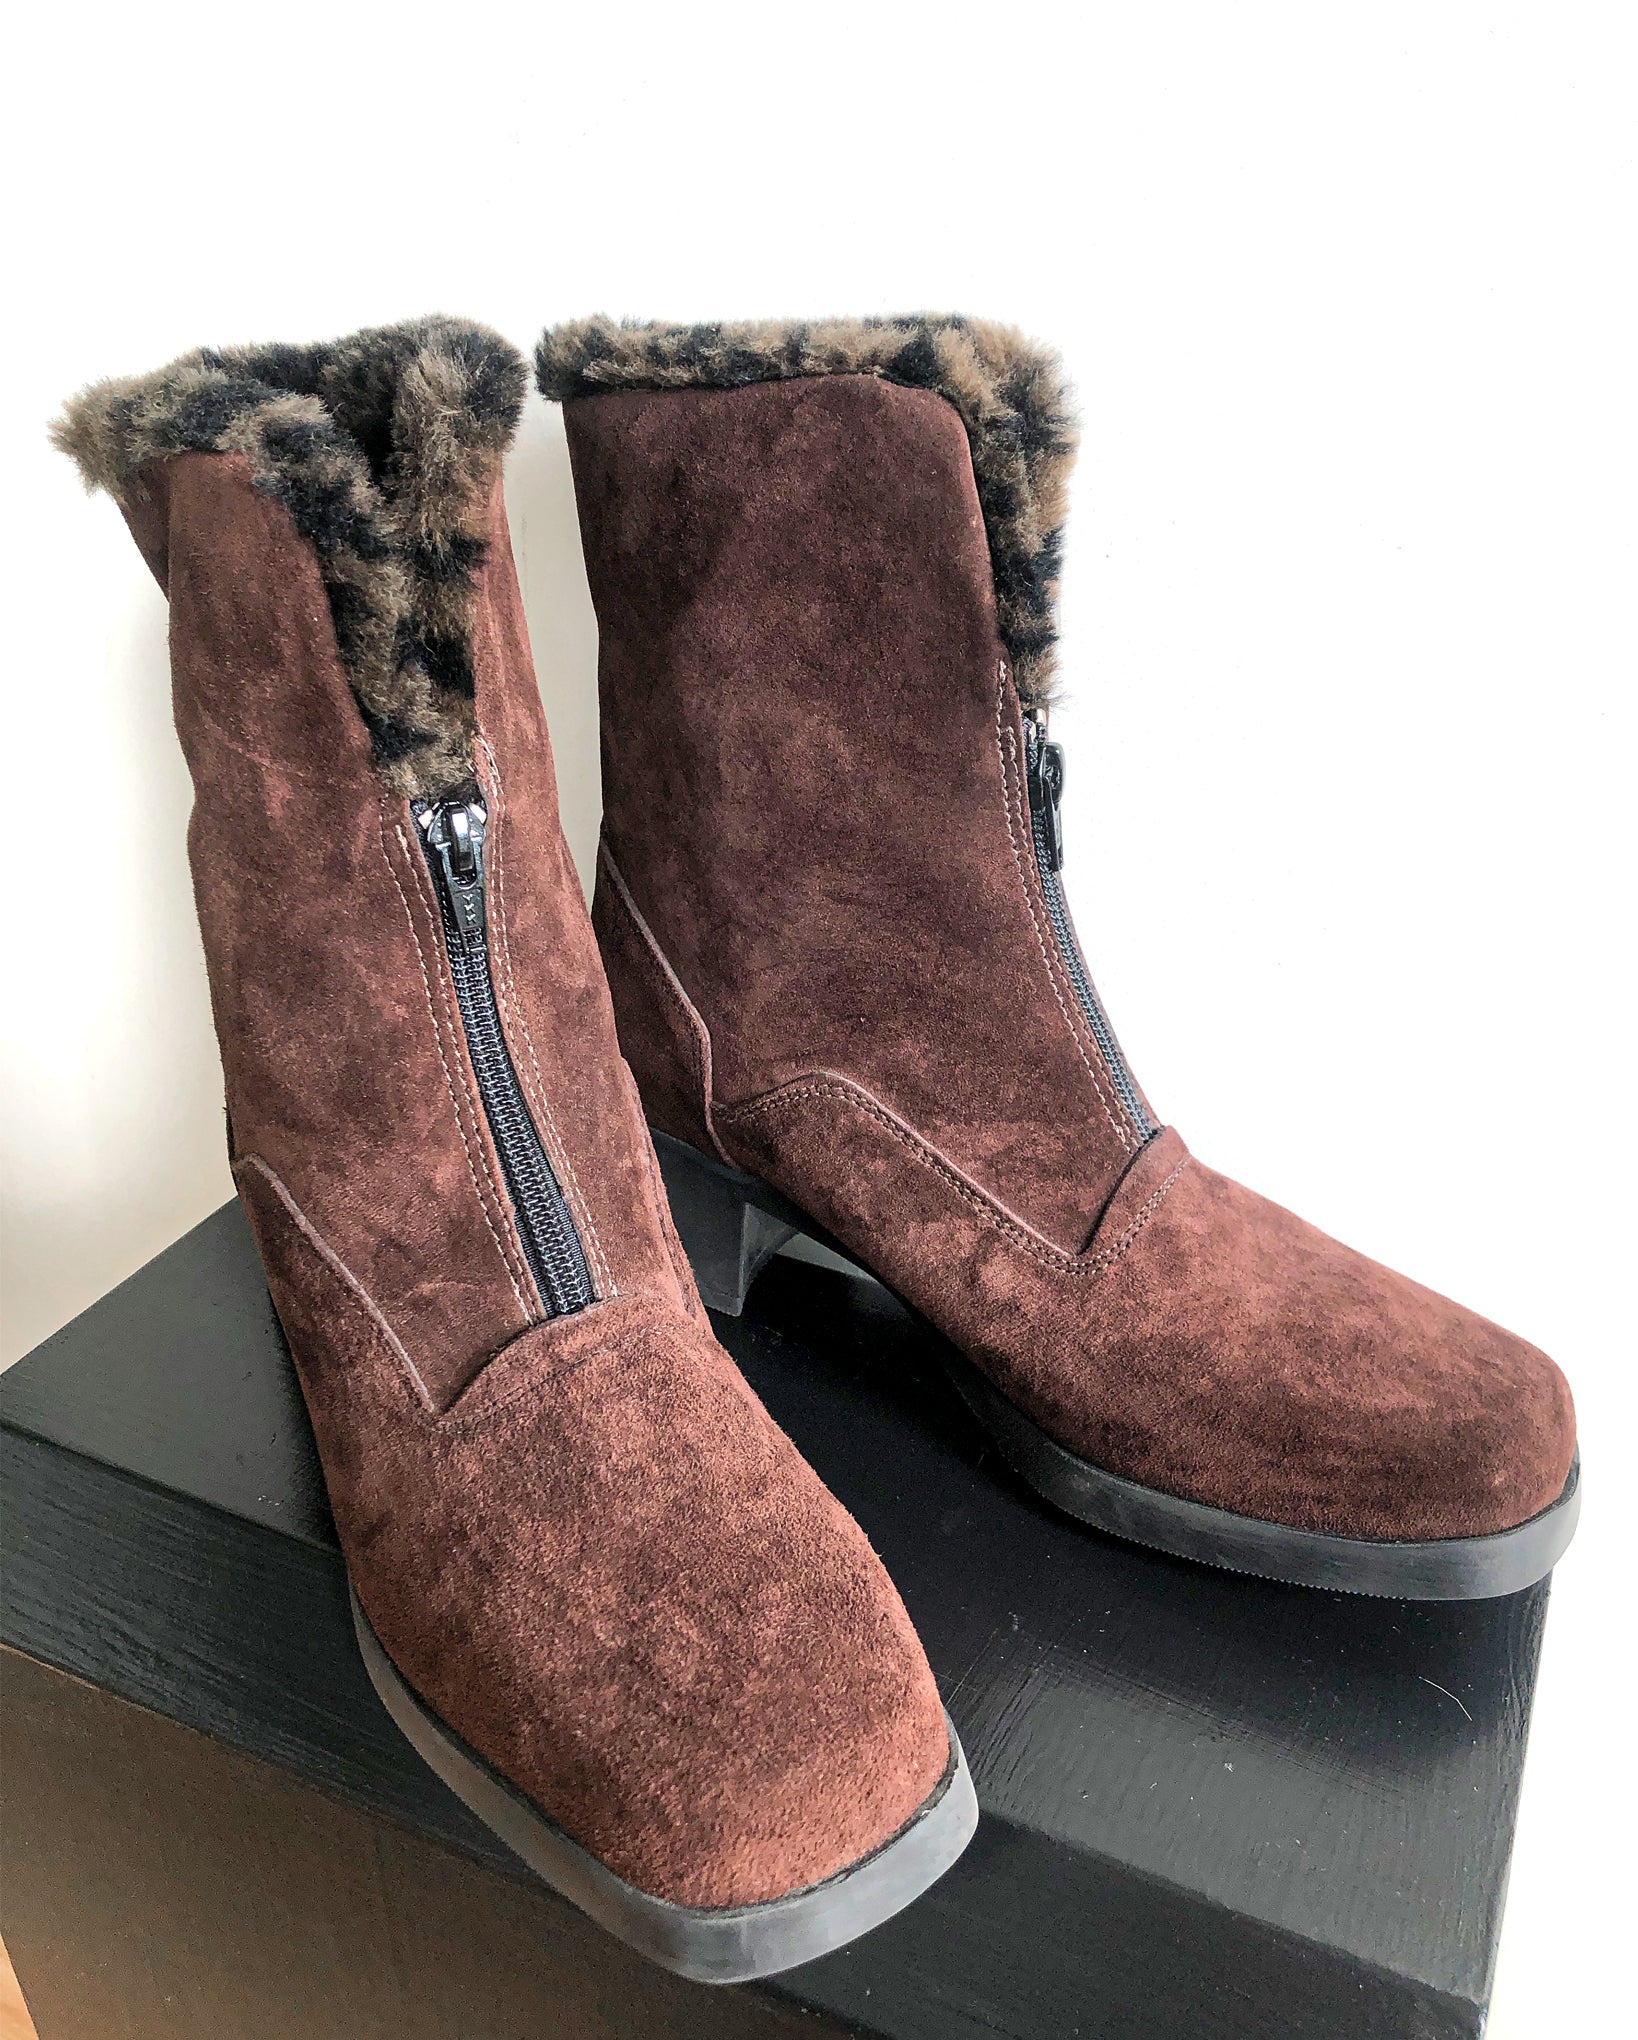 Deadstock 90s Brown Suede Winter Boots Size 9, With Chunky Square Heel By Kamouraska Made in Canada